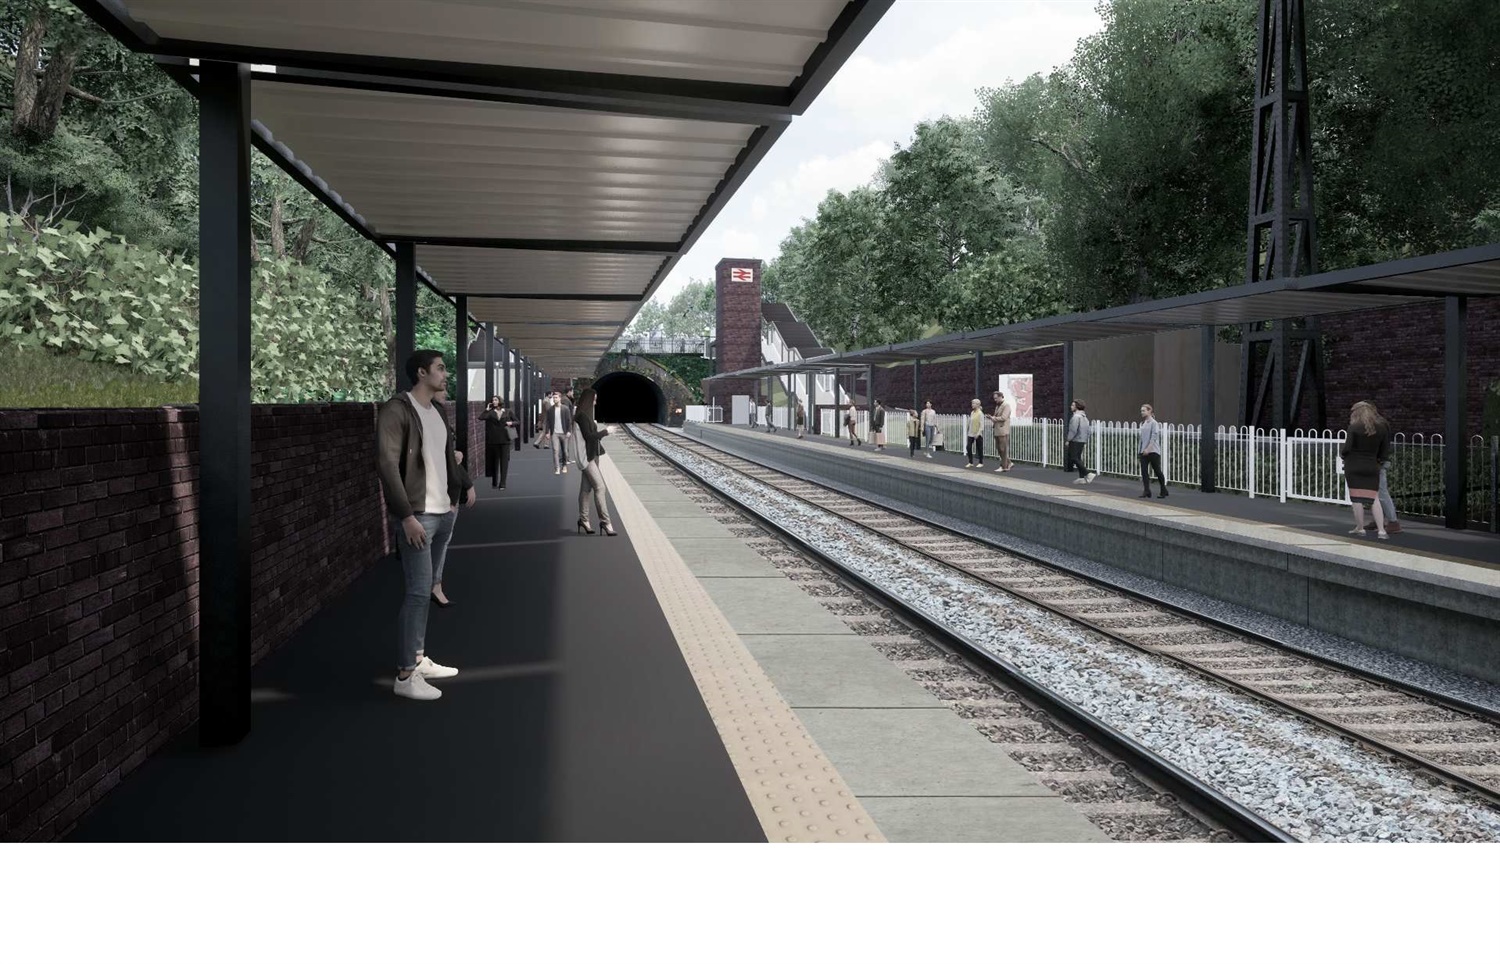 Plans submitted for new Moseley railway station